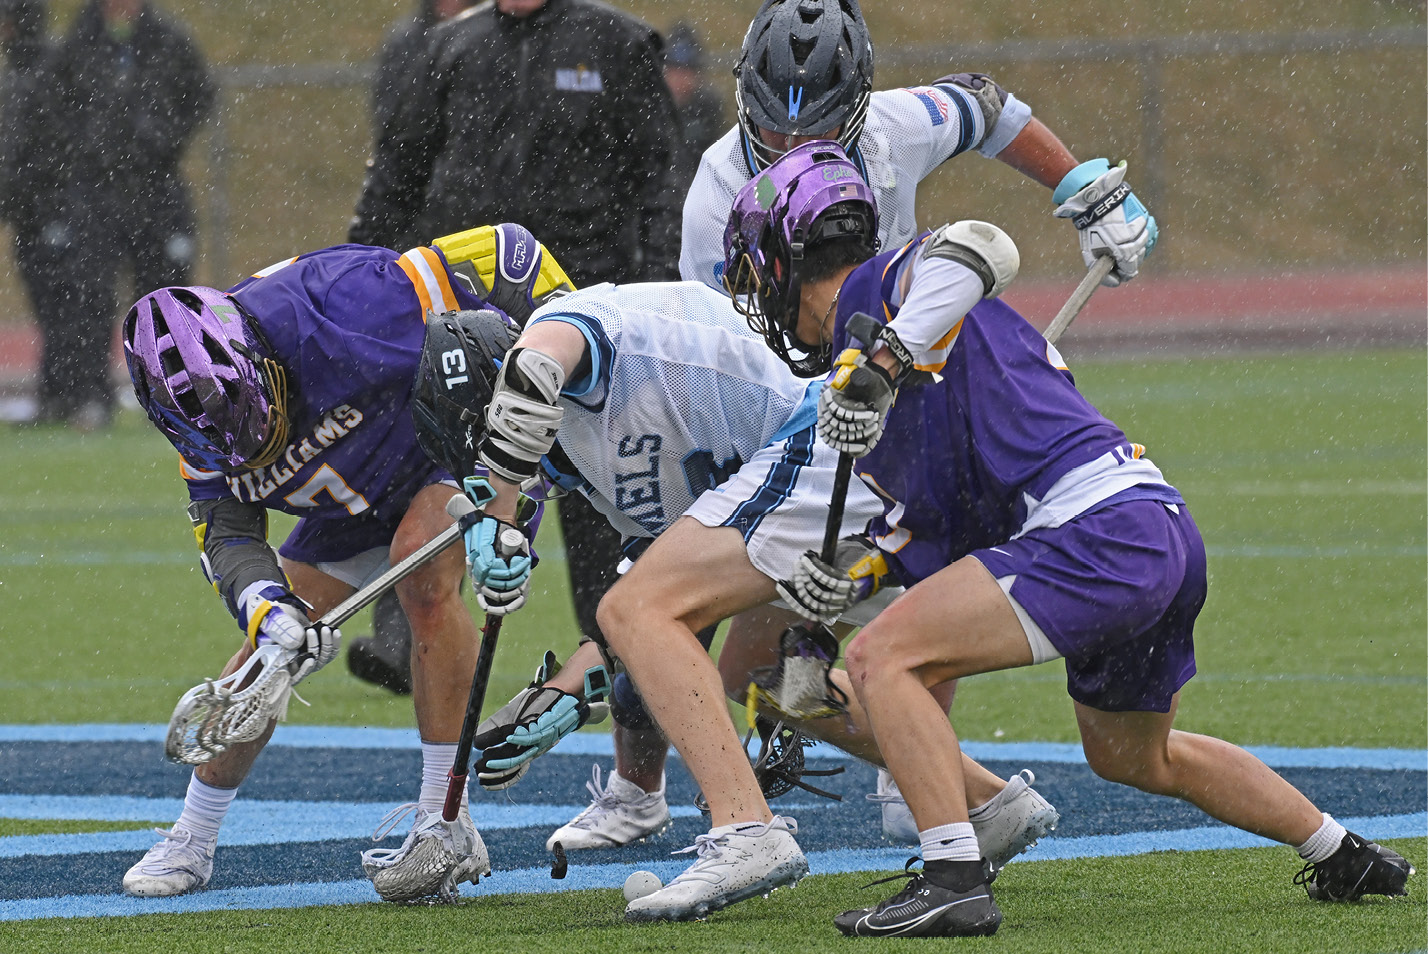 Midfielder Aidan Gaudet ’25 loses his mouthpiece during a face-off vs. Williams.